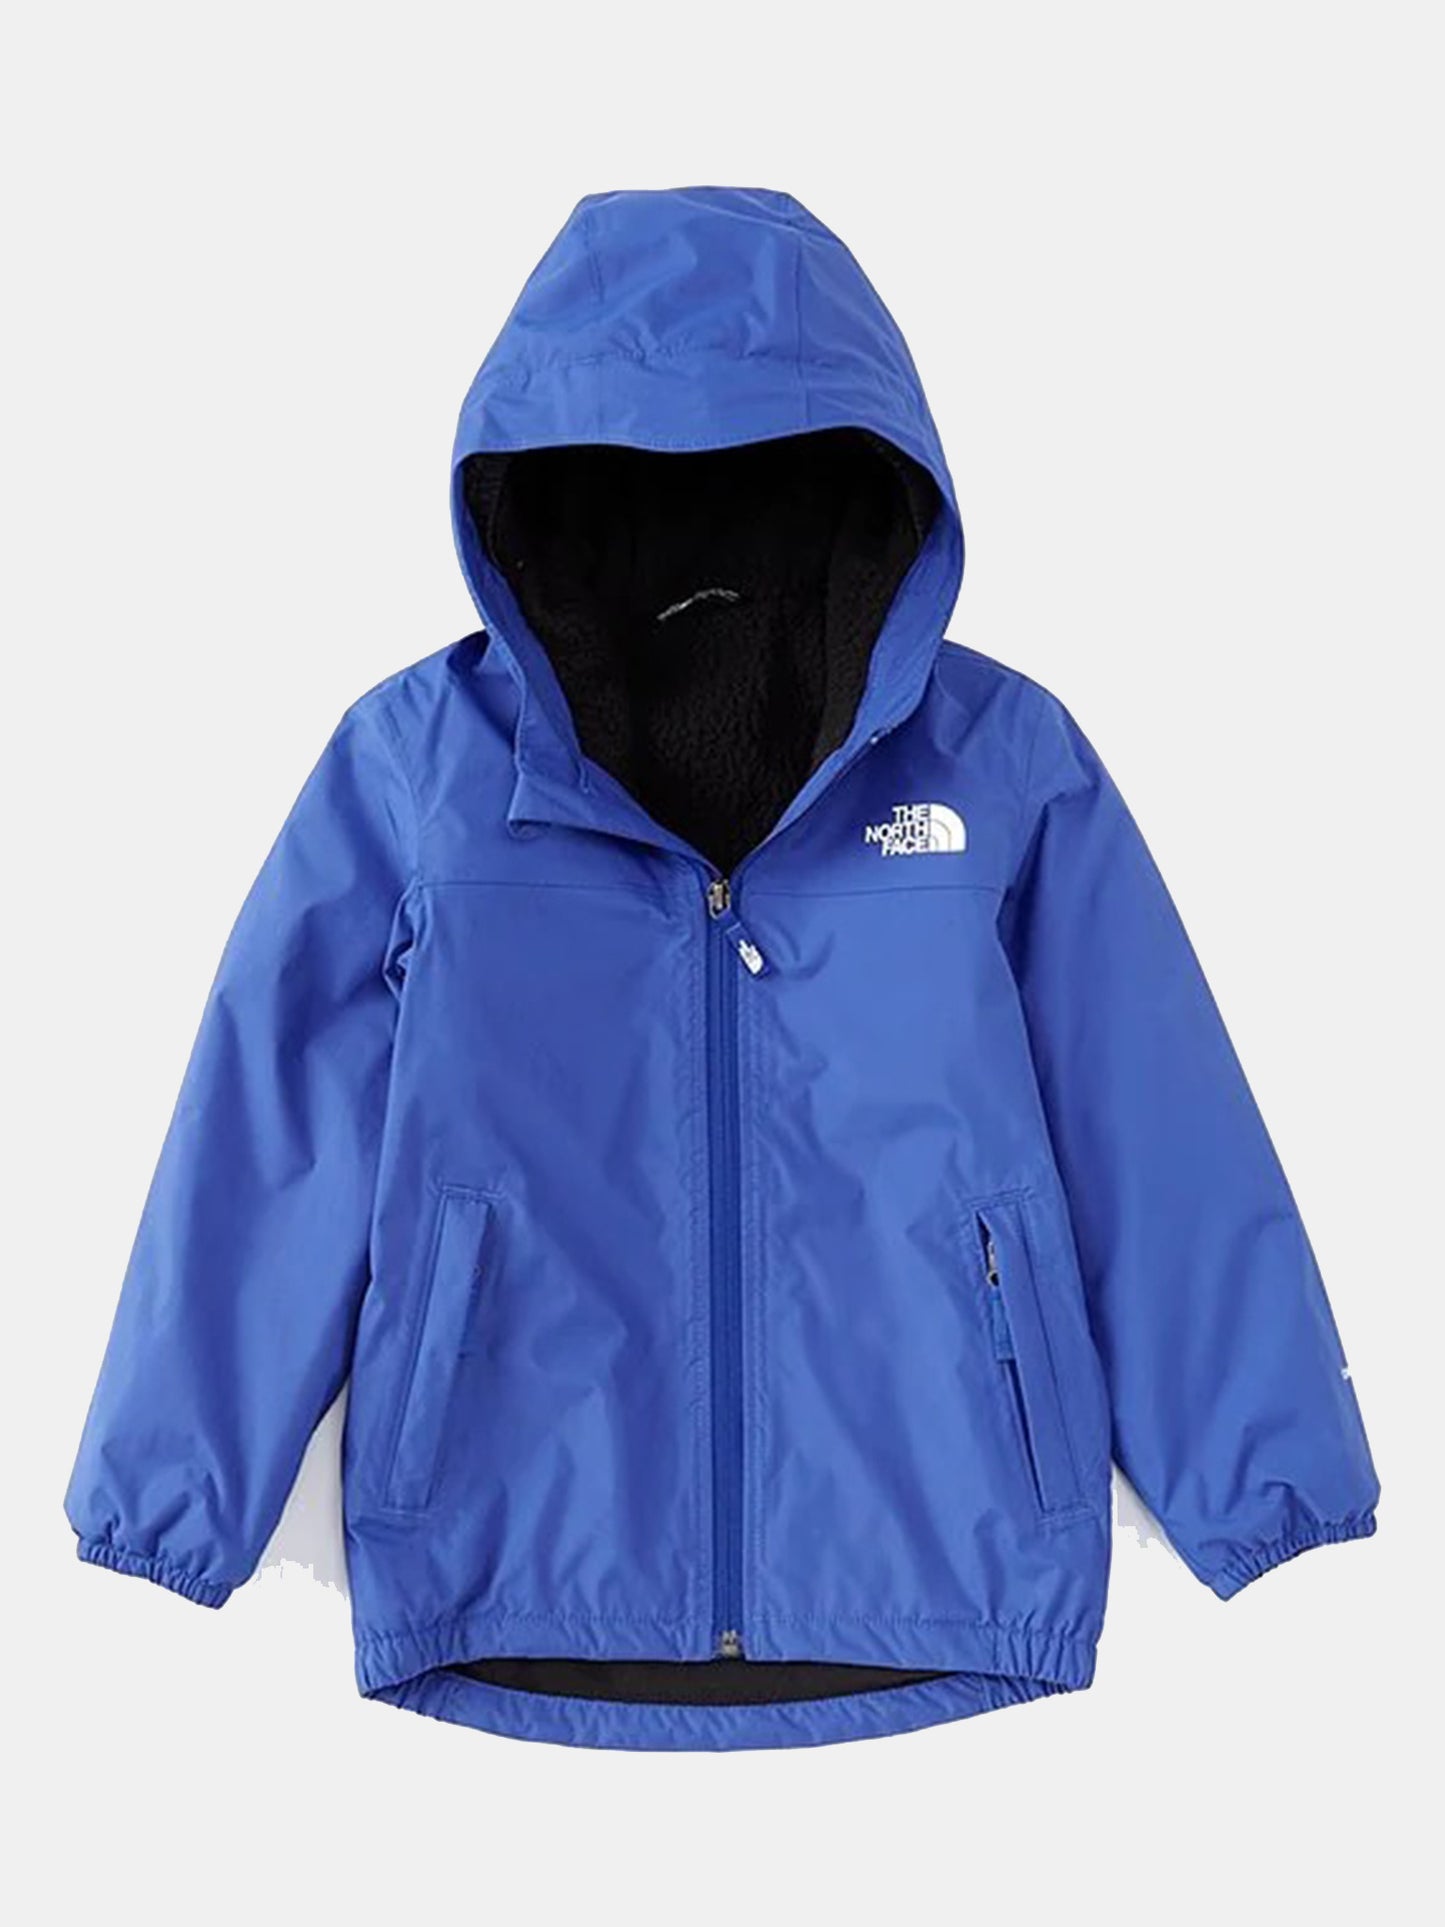 The North Face Toddler Warm Storm Rain Jacket